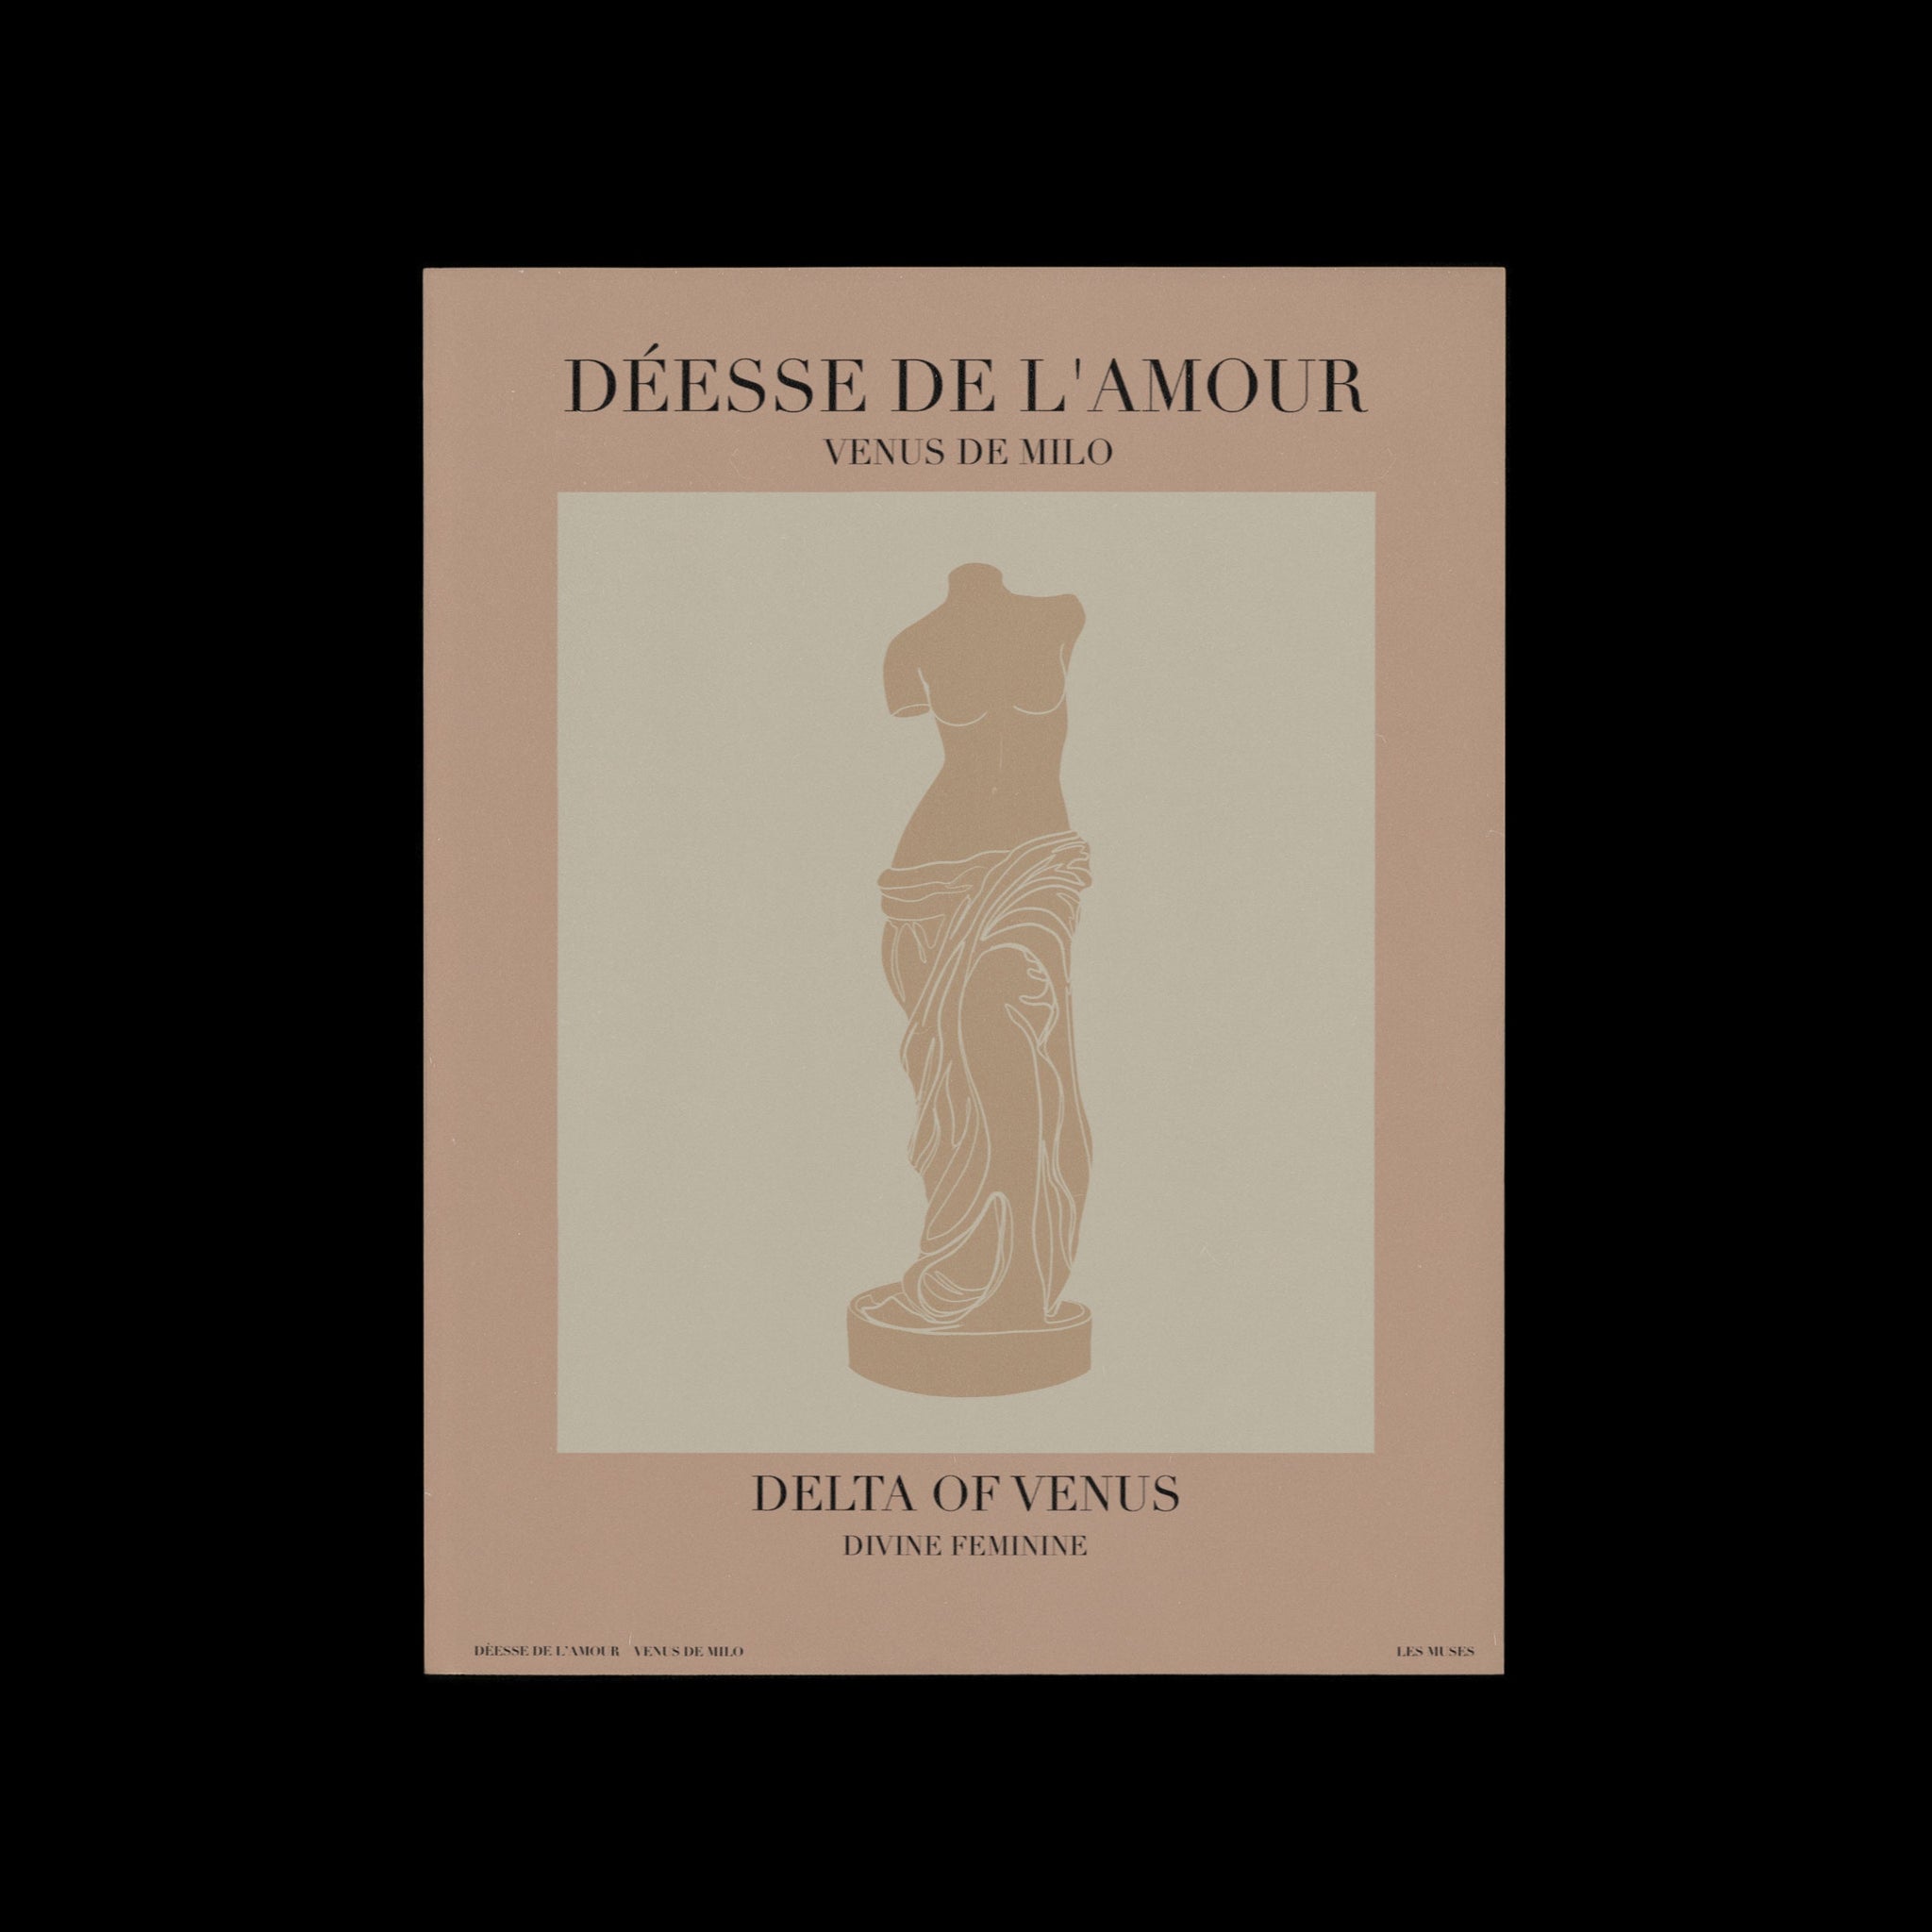 © les muses / Divine Feminine is a dreamy wall art collection featuring line art drawings of the female figure. The minimalist feminine art prints add a vintage touch to any wall gallery.